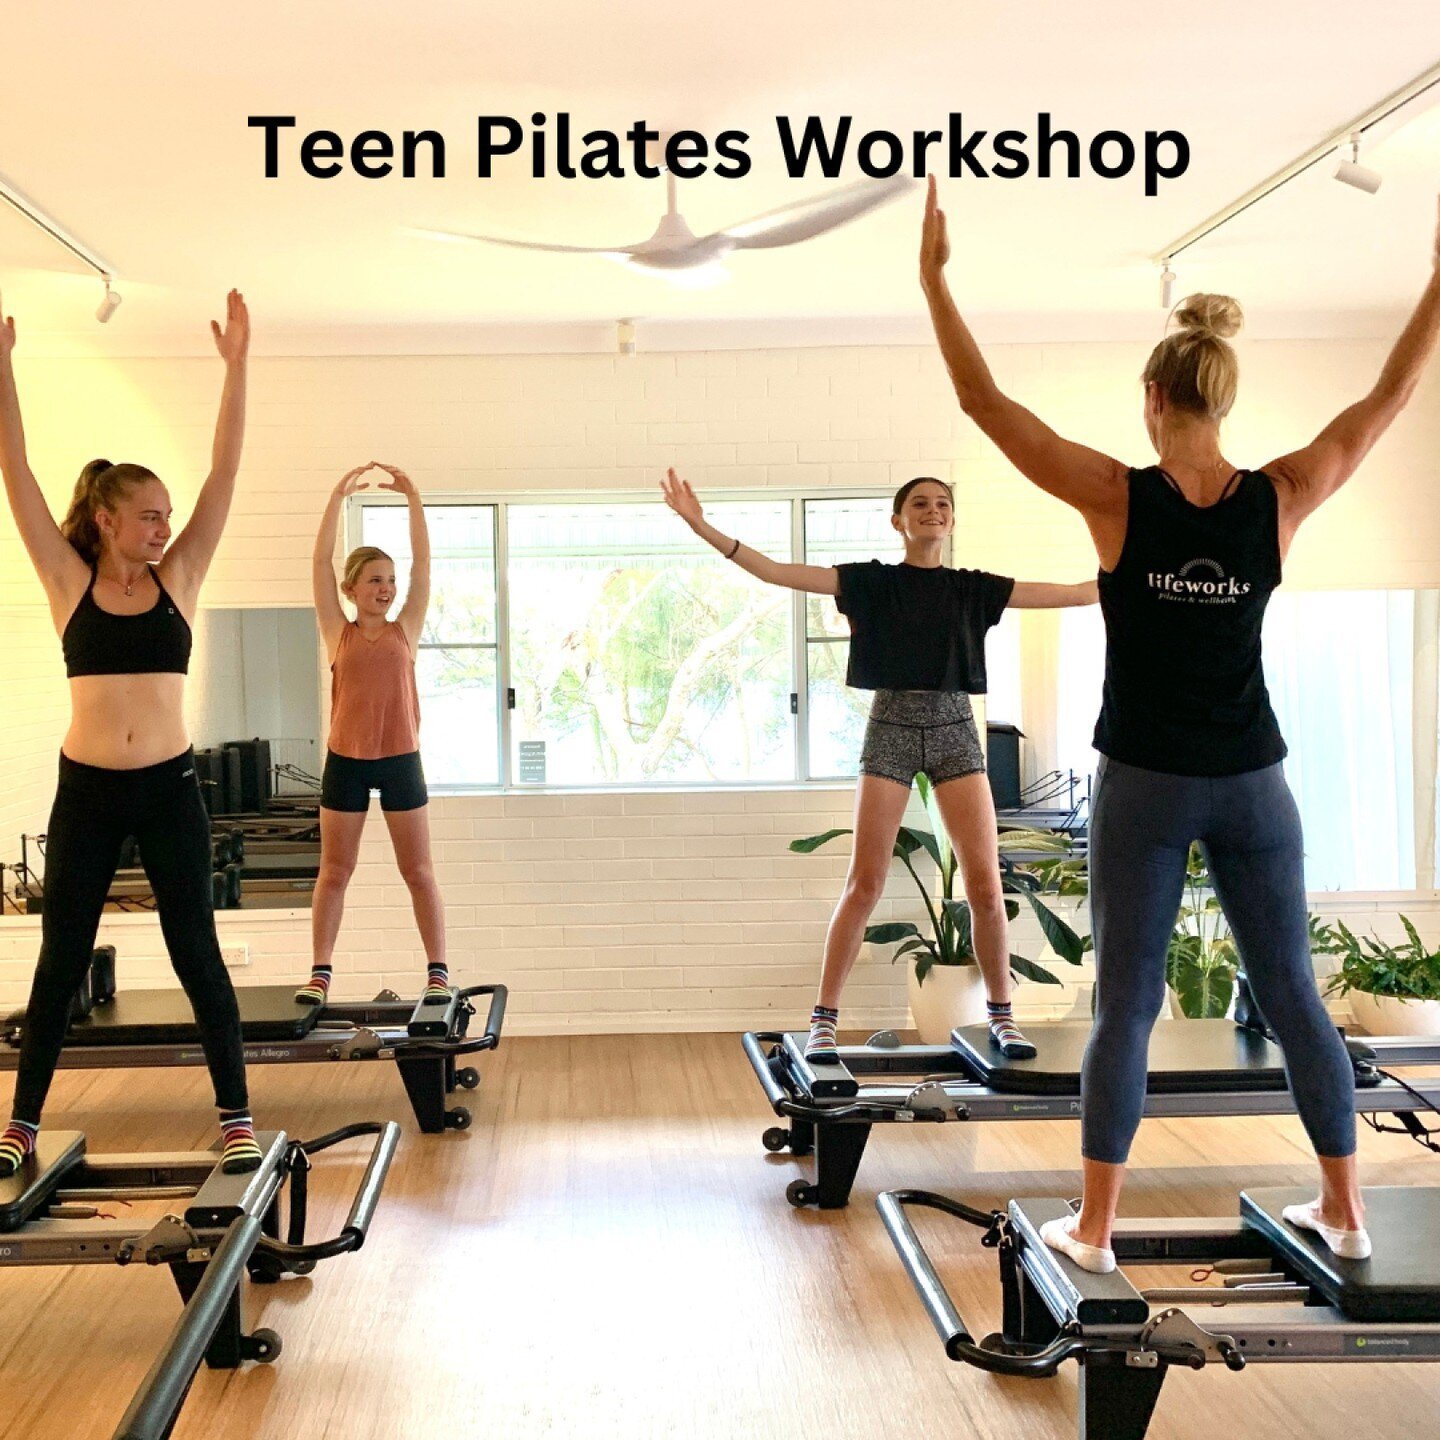 On Wednesday April 17th our wonderful instructor Kellie Coates is offering a &ldquo;Teen Pilates and Wellbeing Workshop&rdquo;. Kellie will work with your teen on joint stability, core strength and balance, mind/body awareness, positive psychology an